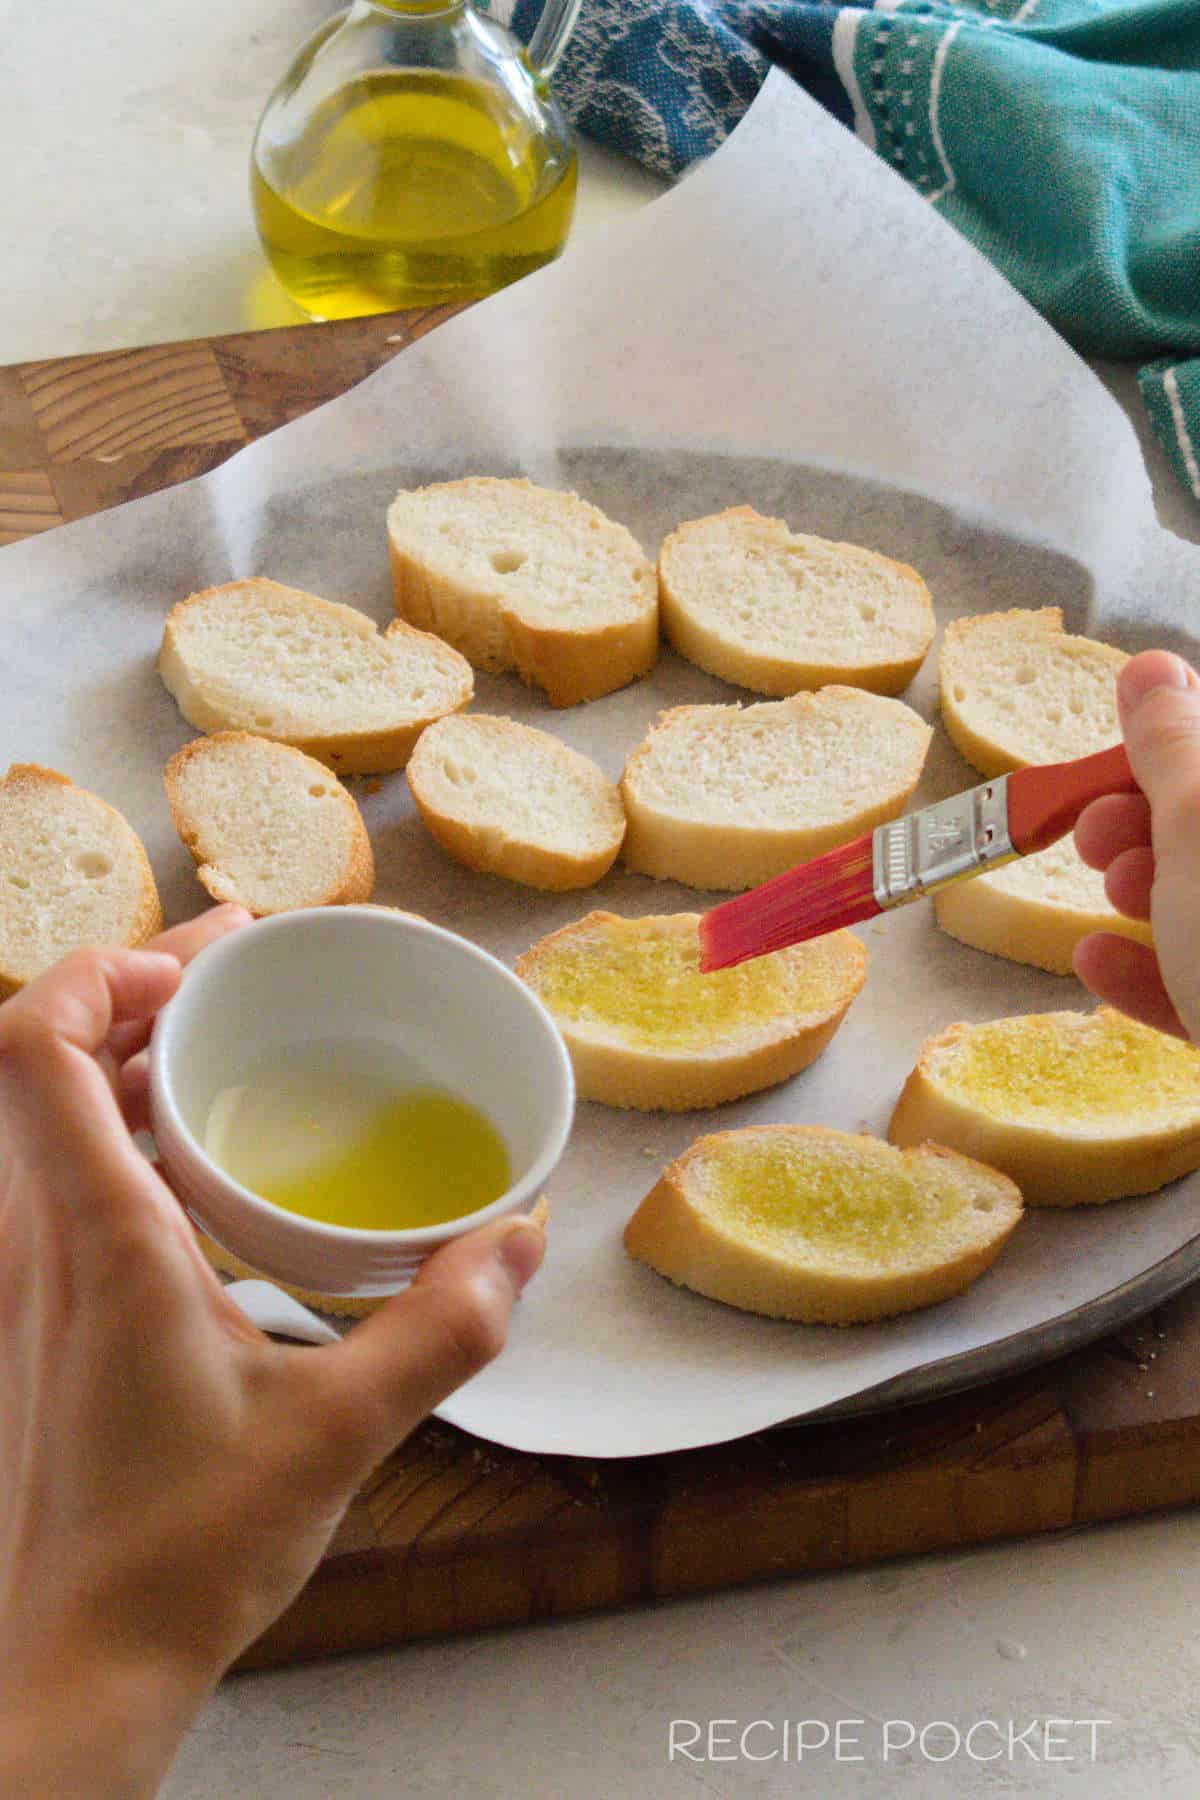 Baguette slices with olive oil.